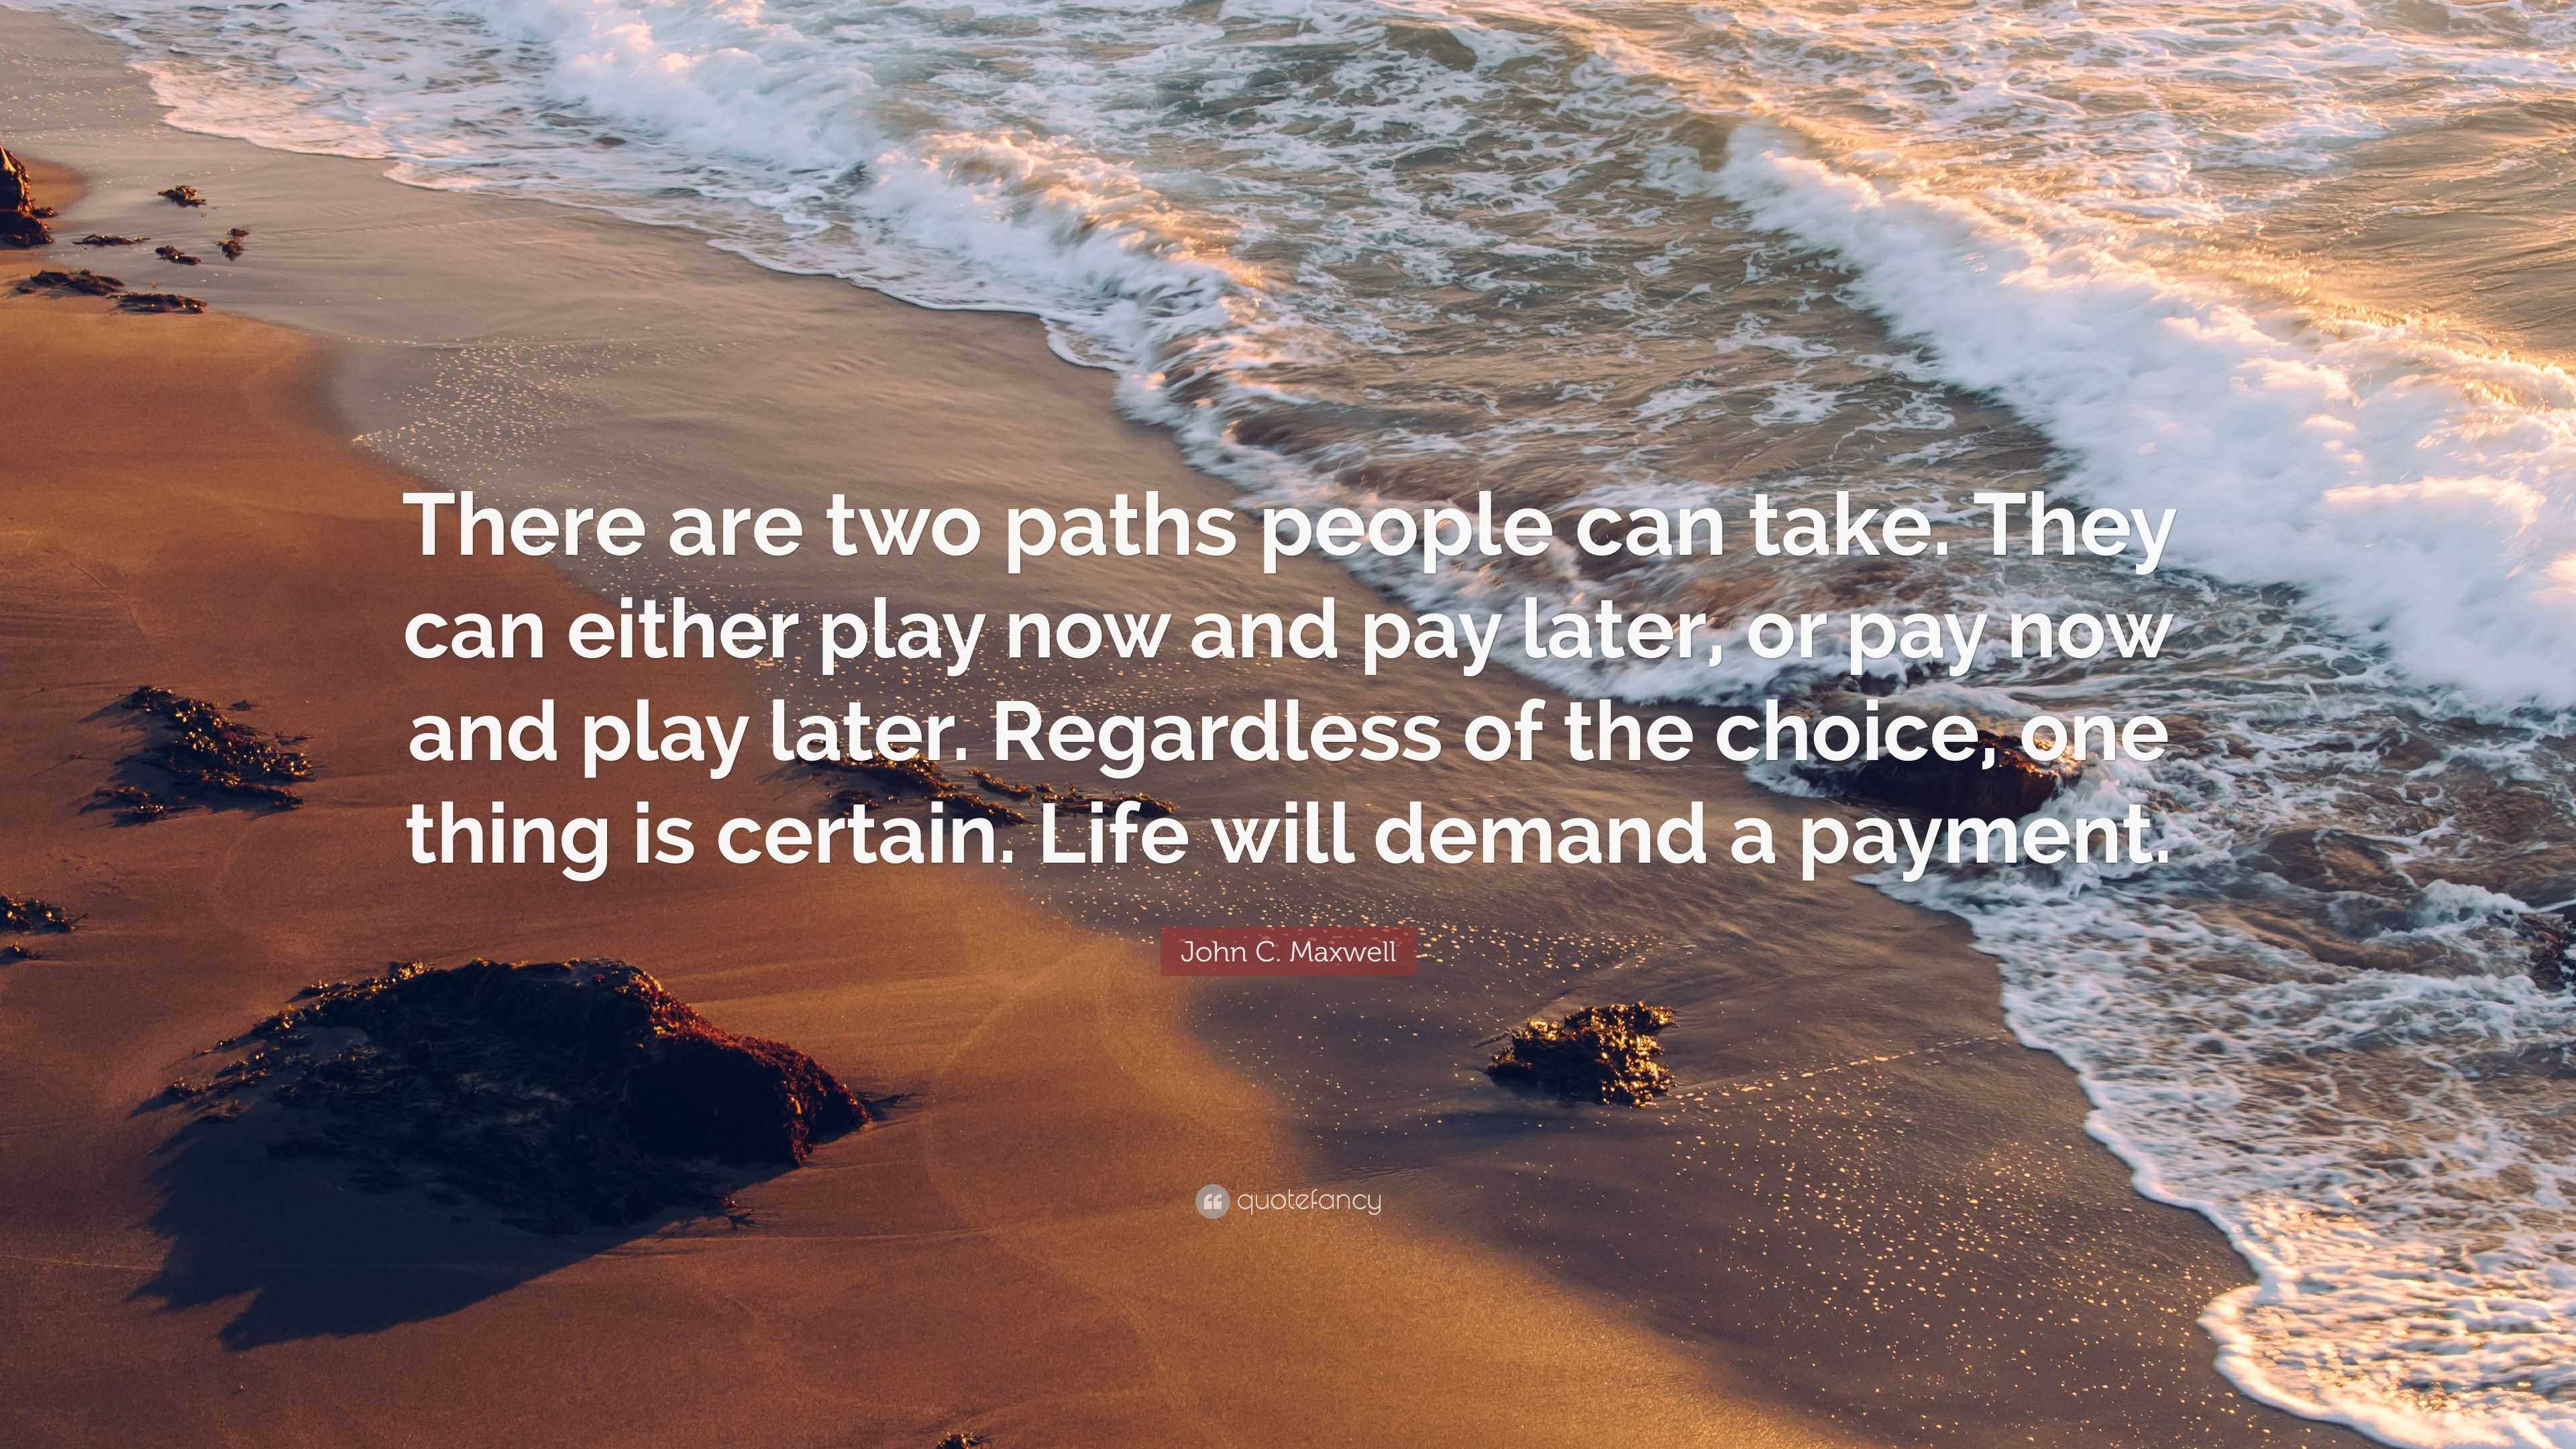 John C. Maxwell Quote: “There are two paths people can take. They can  either play now and pay later, or pay now and play later. Regardless of  th”